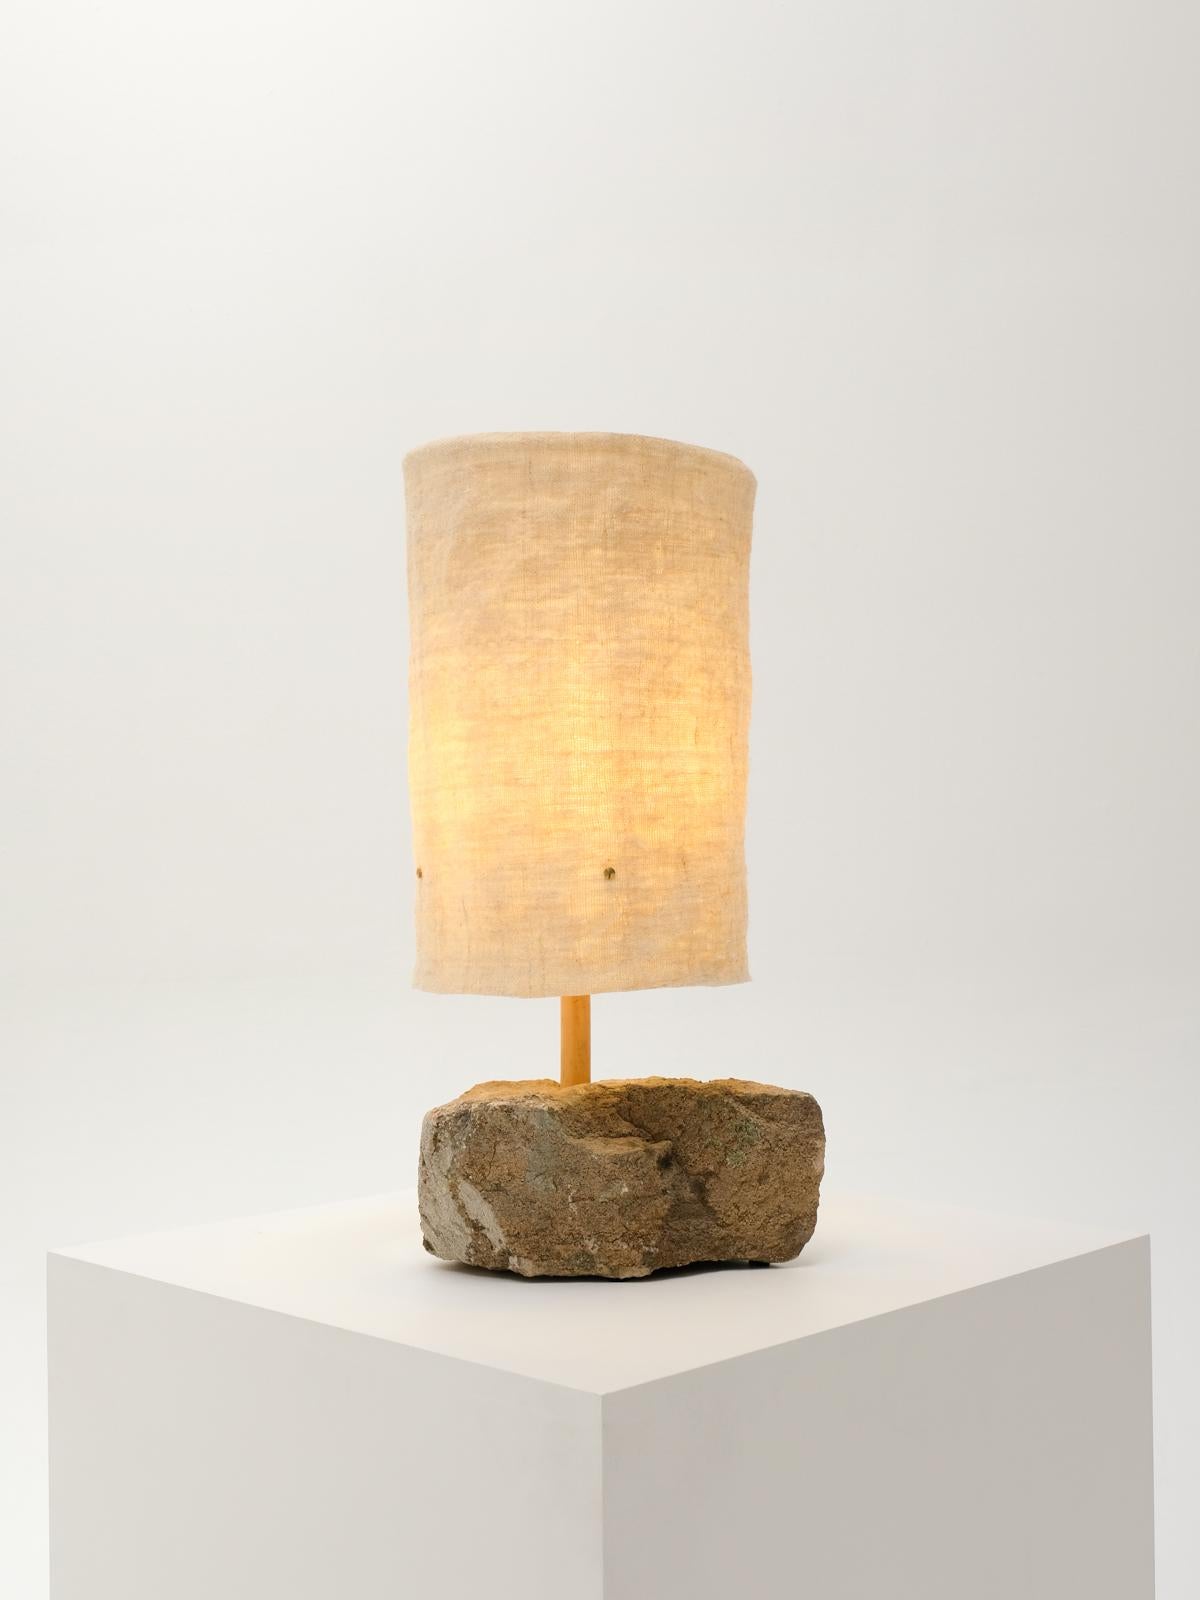 Hjra Table Lamp Large, Handspun, Handwoven wool Lampshade, Made of Rock & Reed For Sale 5